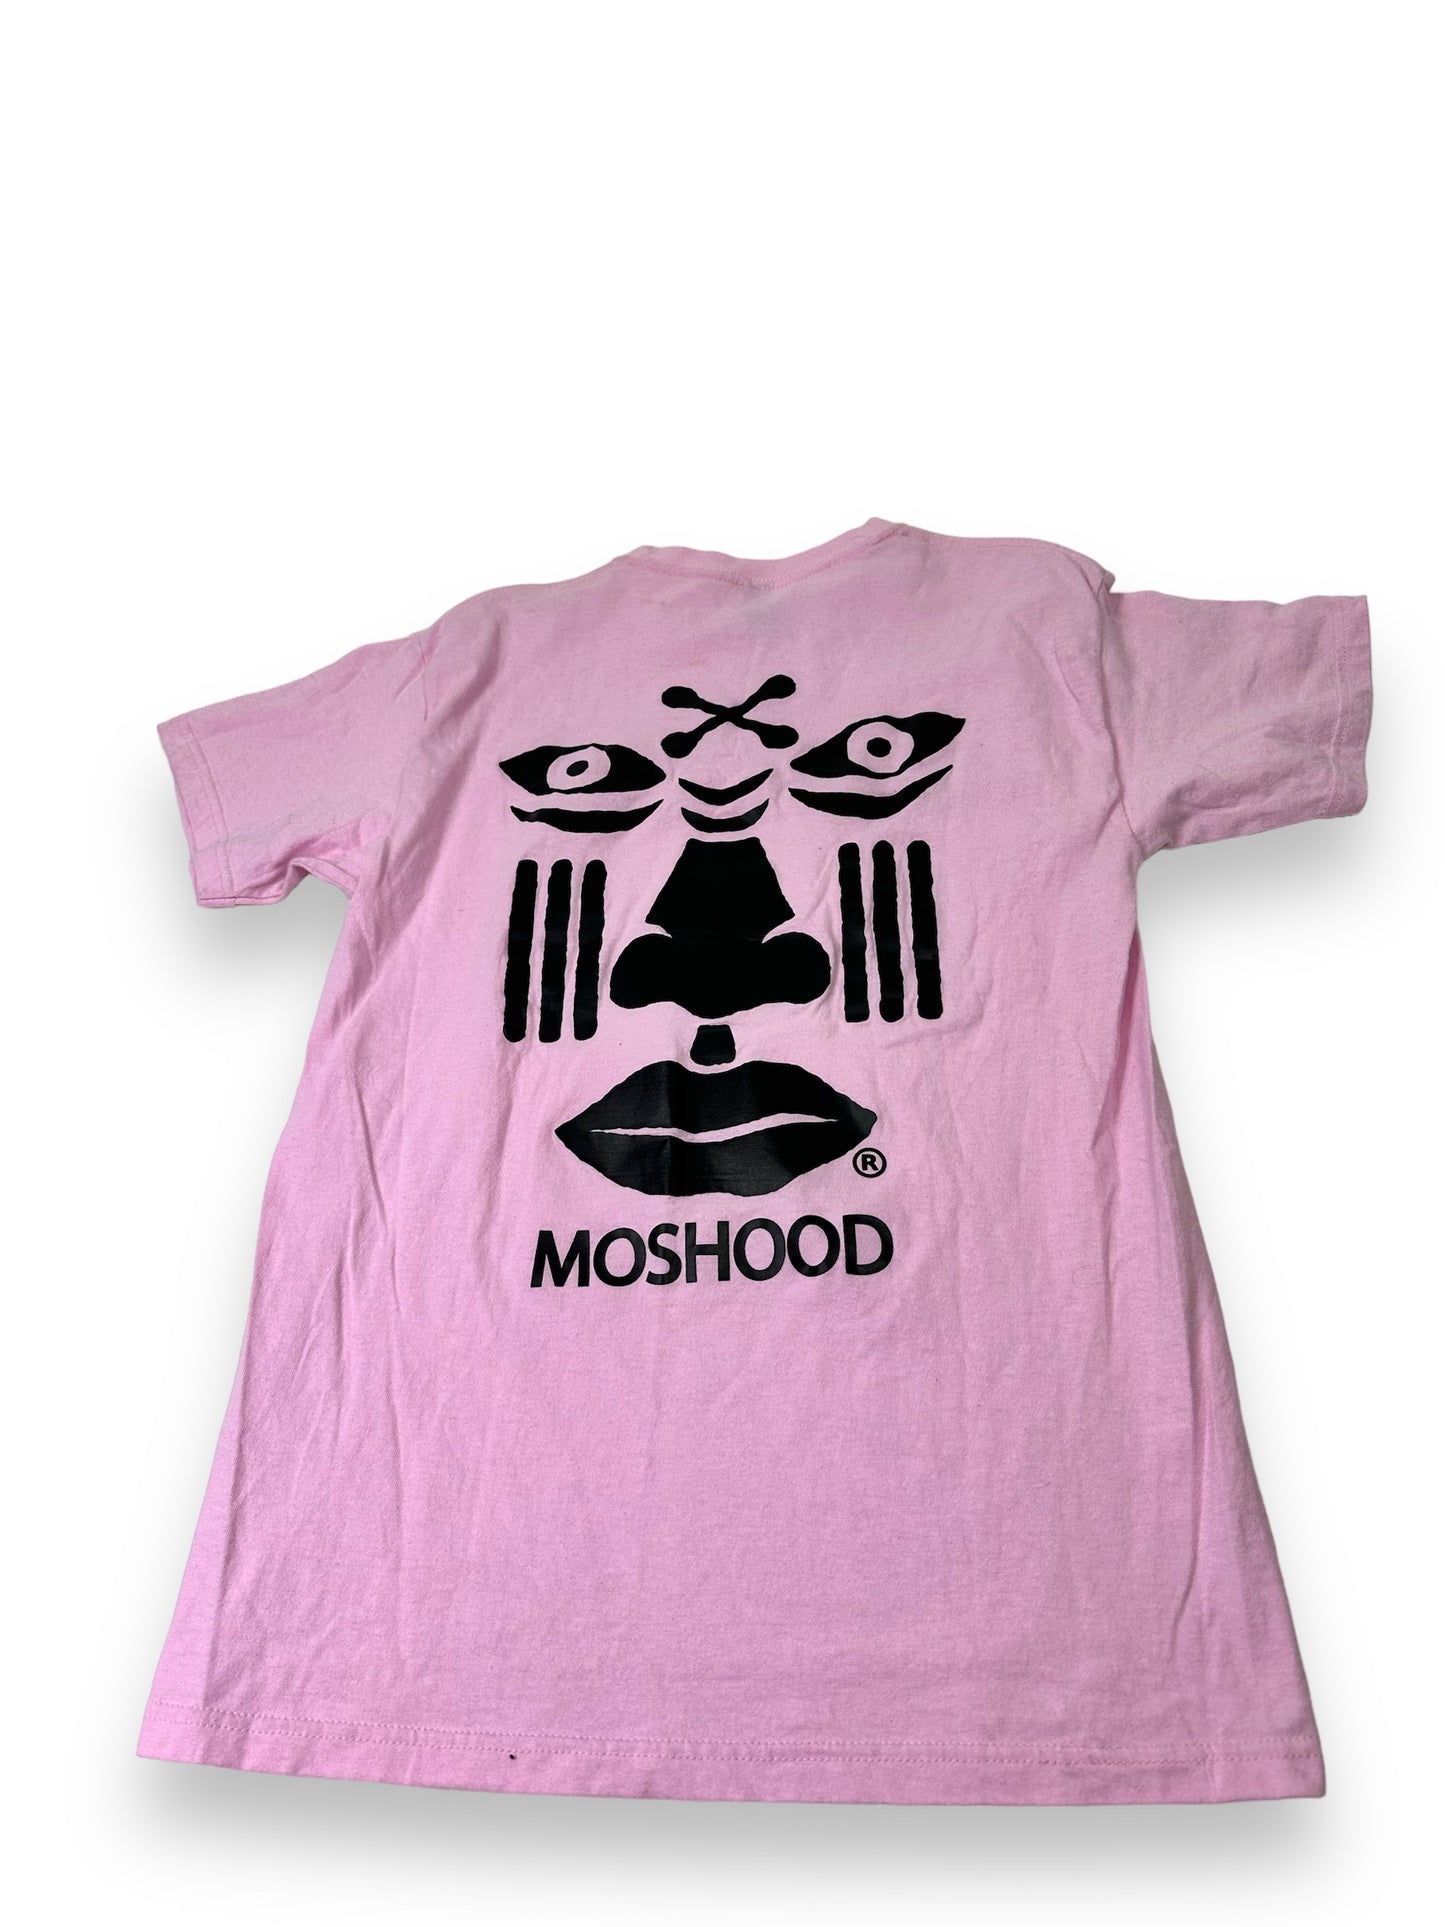 1990s Moshood Pale Pink Graphic T